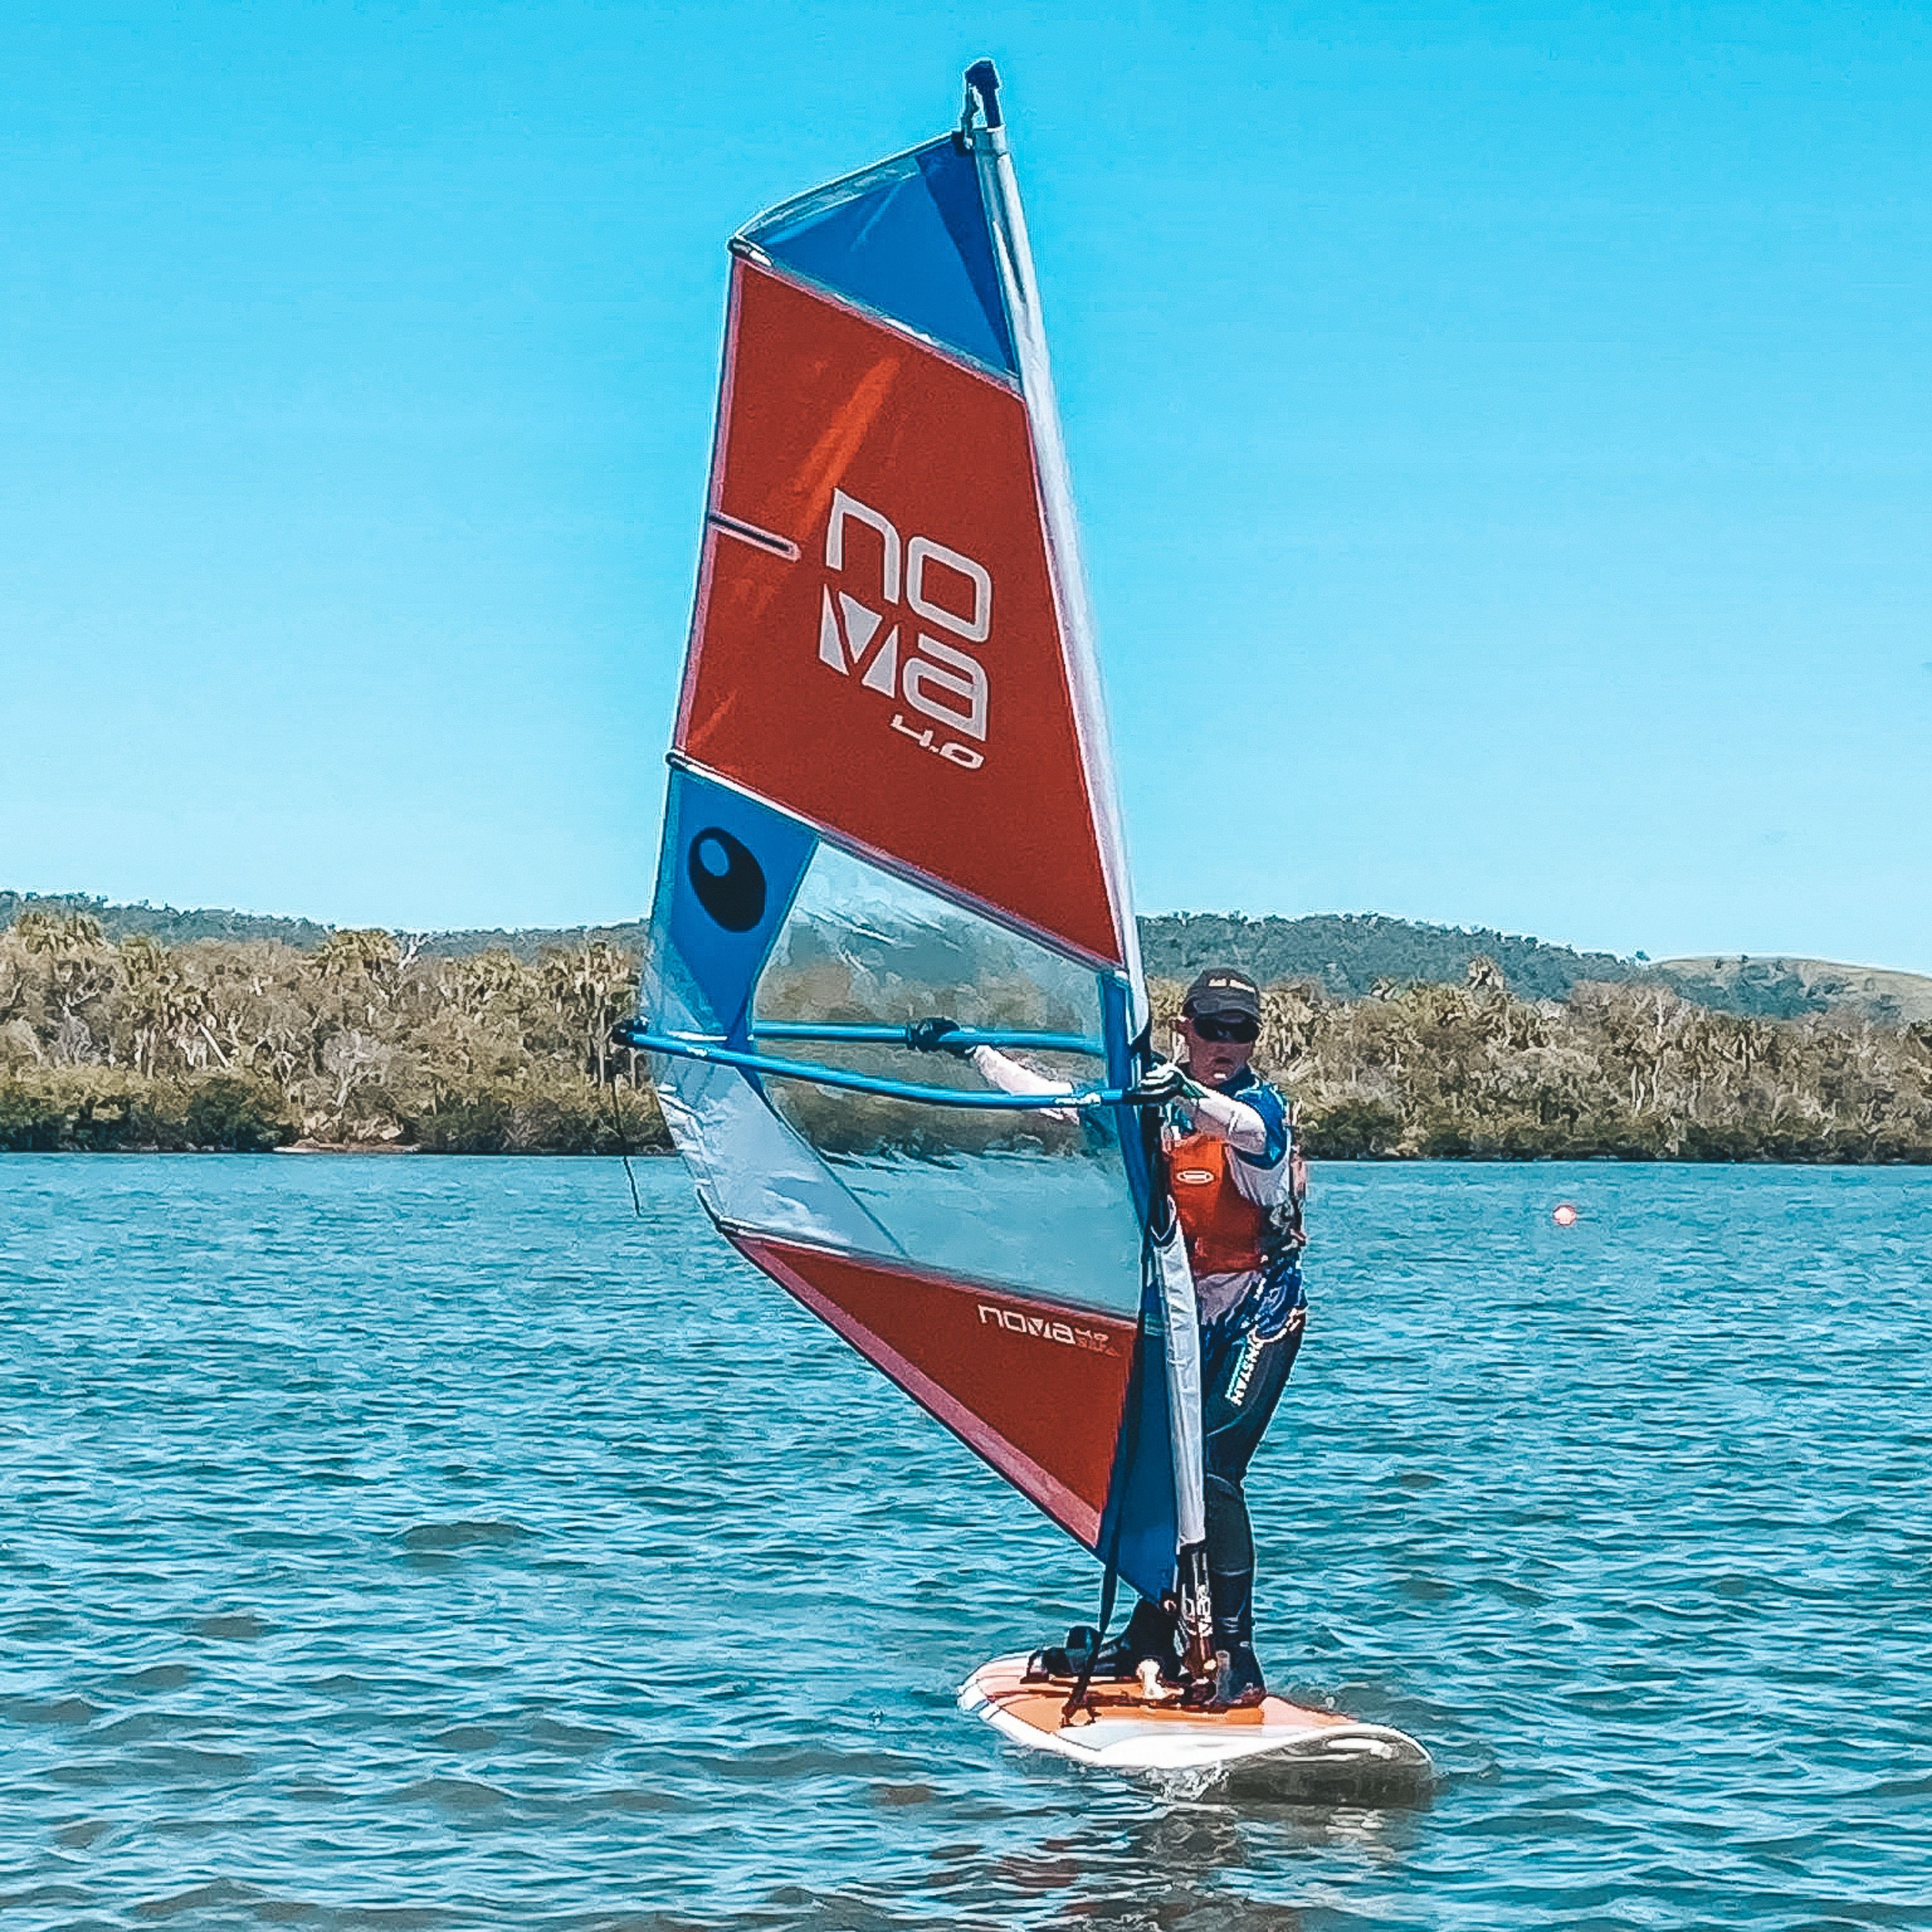 KBSC discover wind surfing